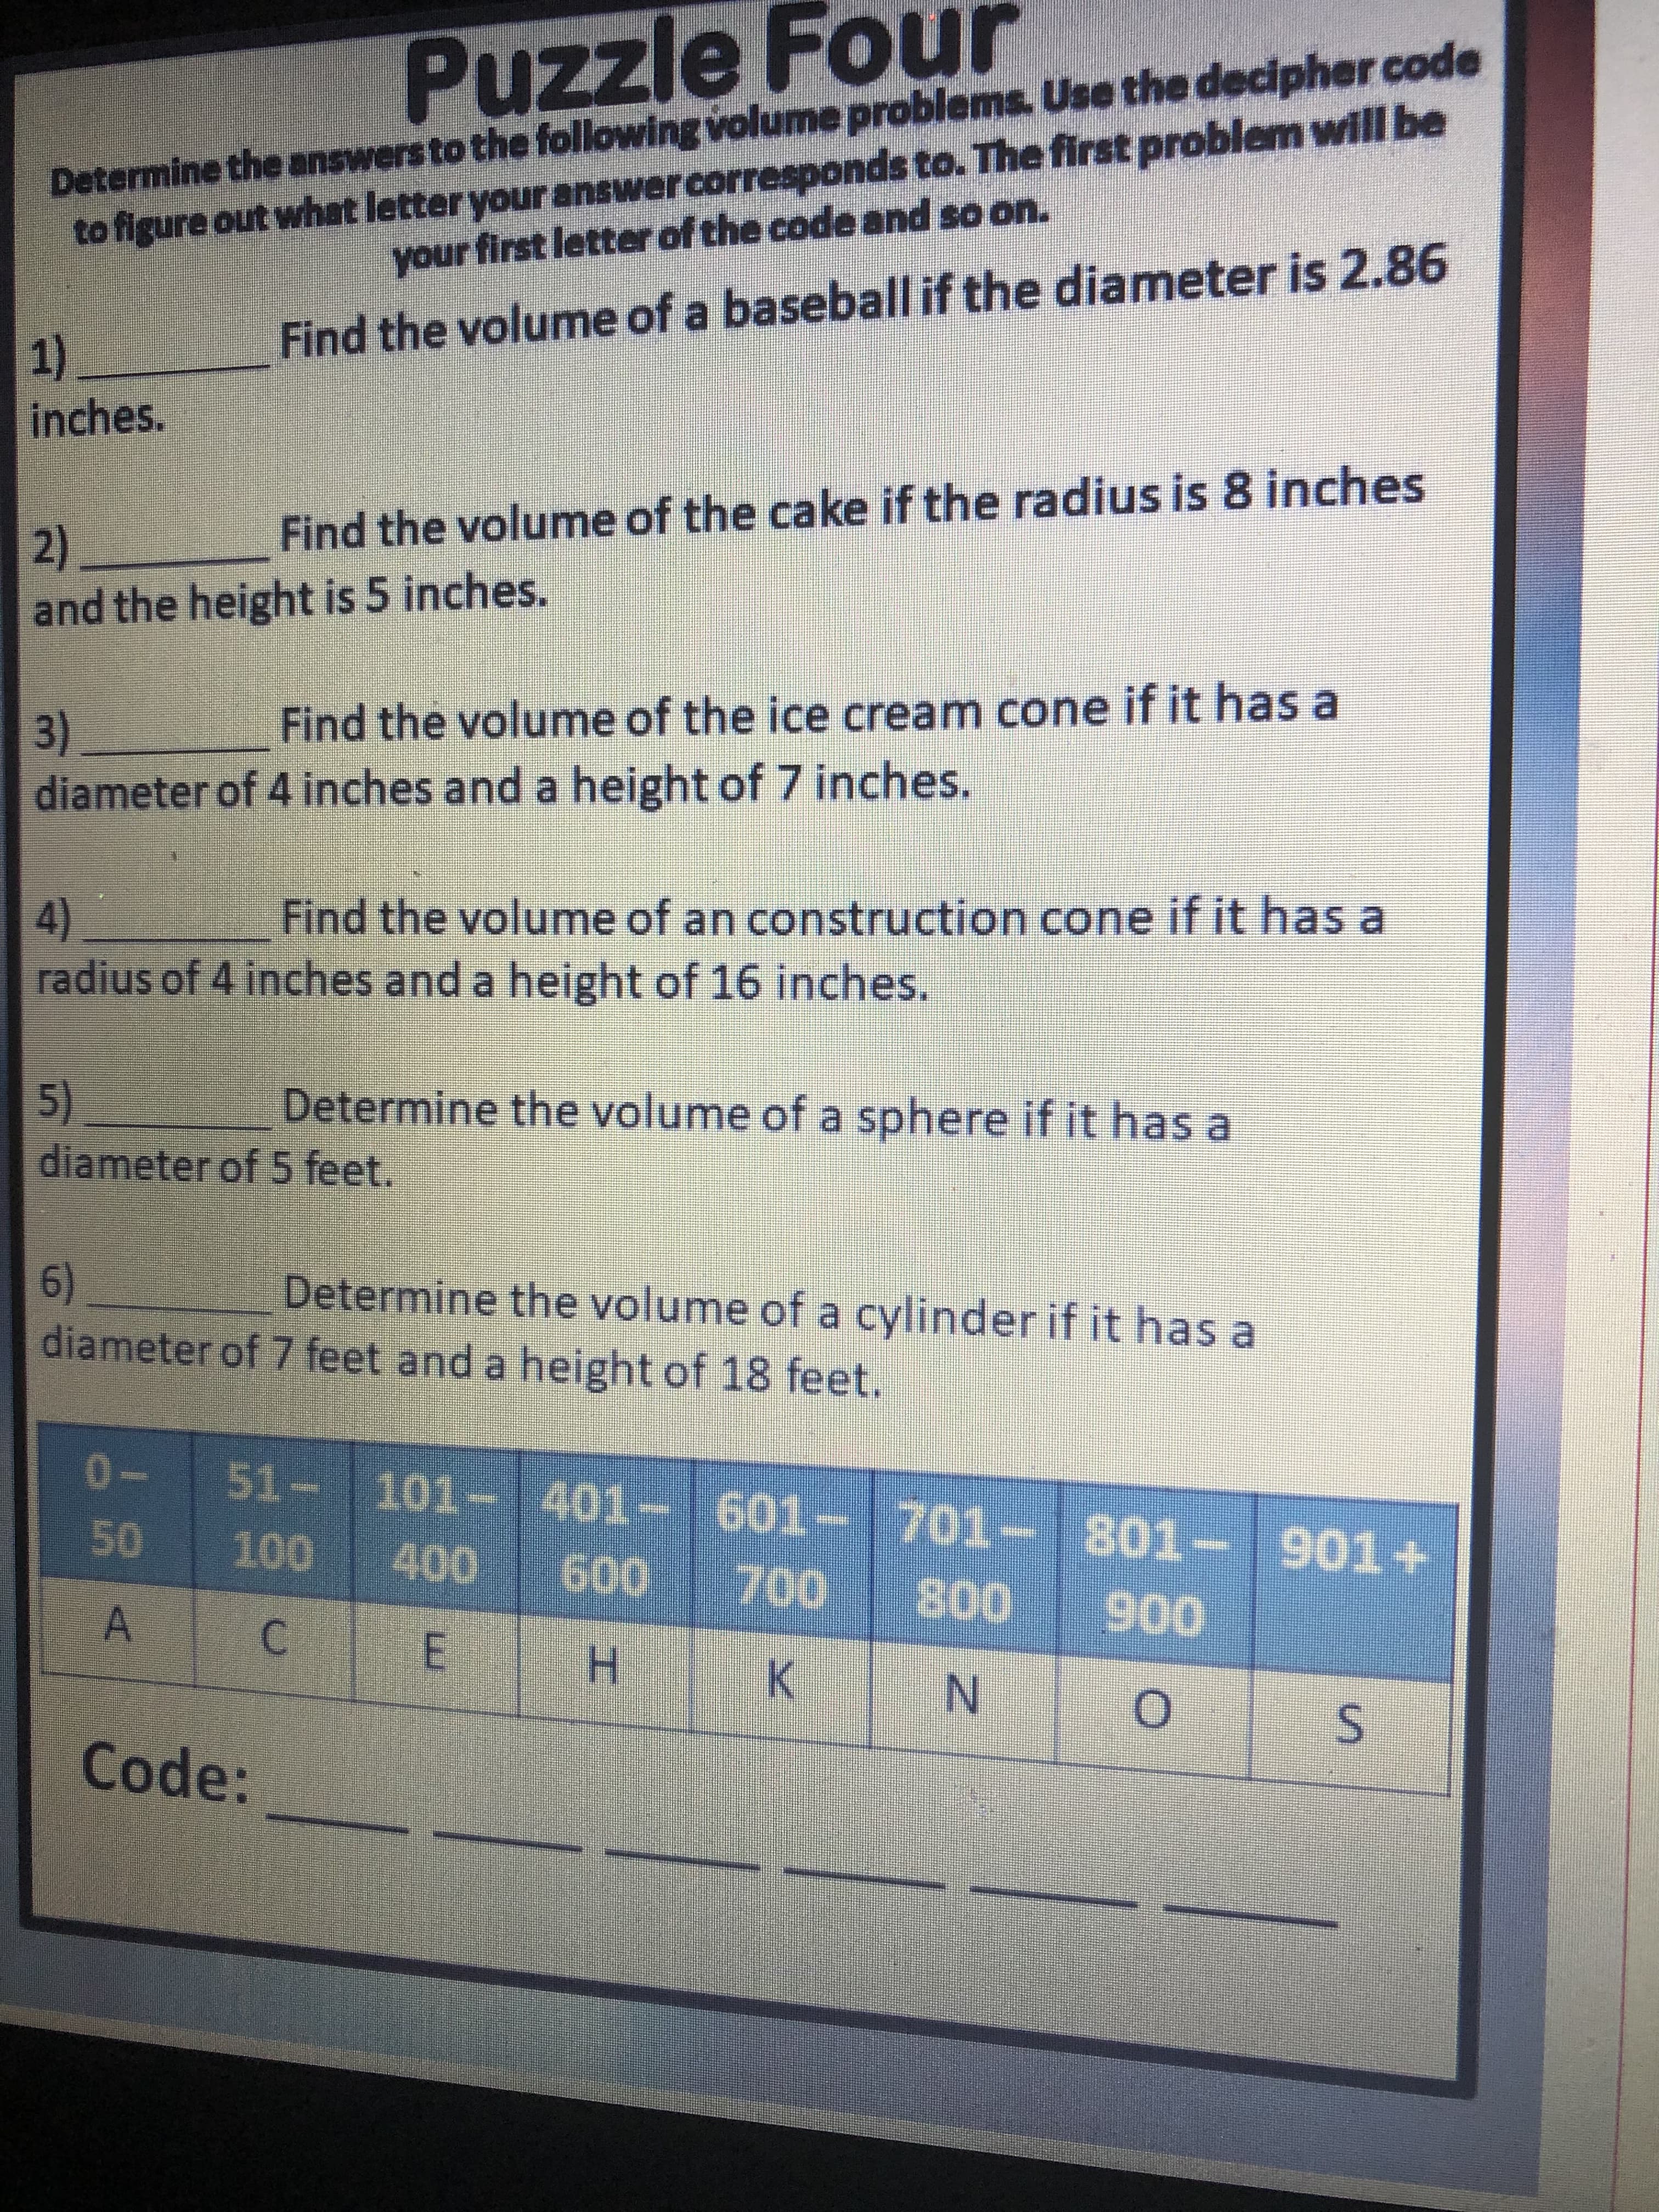 S.
C.
A.
Puzzle Four
Determine the answers to the following volume problems. Use the decipher code
to figure out what letter your answercorresponds to. The first problem will be
your first letter of the code and so on.
1).
inches.
Find the volume of a baseball if the diameter is 2.86
2)
and the height is 5 inches.
Find the volume of the cake if the radius is 8 inches
3)
diameter of 4 inches and a height of 7 inches.
Find the volume of the ice cream cone if it has a
4)
radius of 4 inches and a height of 16 inches.
Find the volume of an construction cone if it has a
5)
diameter of 5 feet.
Determine the volume of a sphere if it has a
6)
diameter of 7 feet and a height of 18 feet.
Determine the volume of a cylinder if it has a
0-
51-101- 401- 601-701-801-
E
K.
006008
